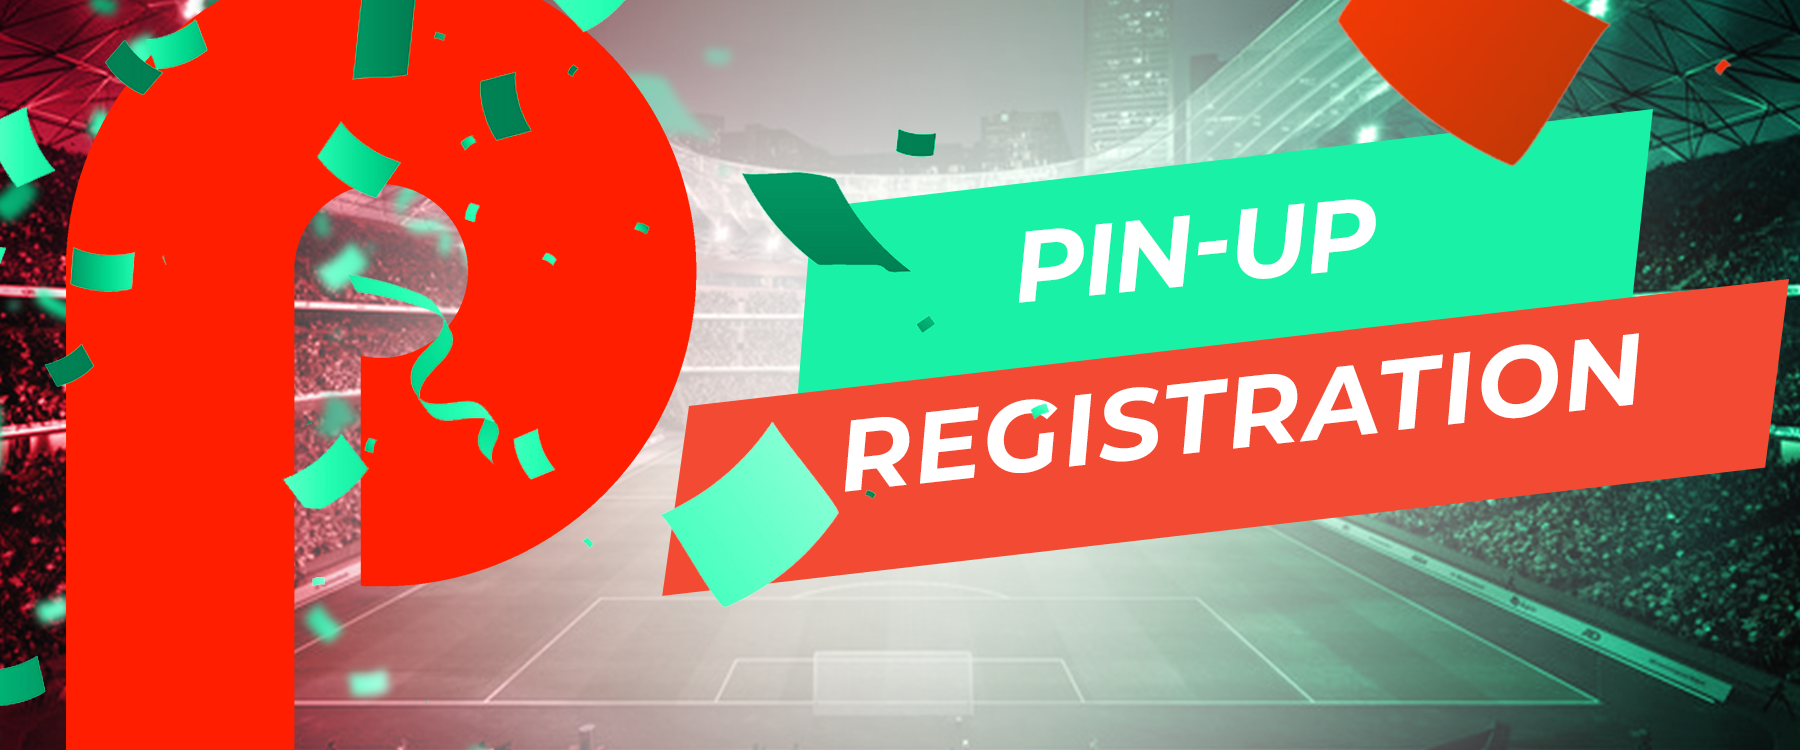 How to become a part of Pin-Up online casino?